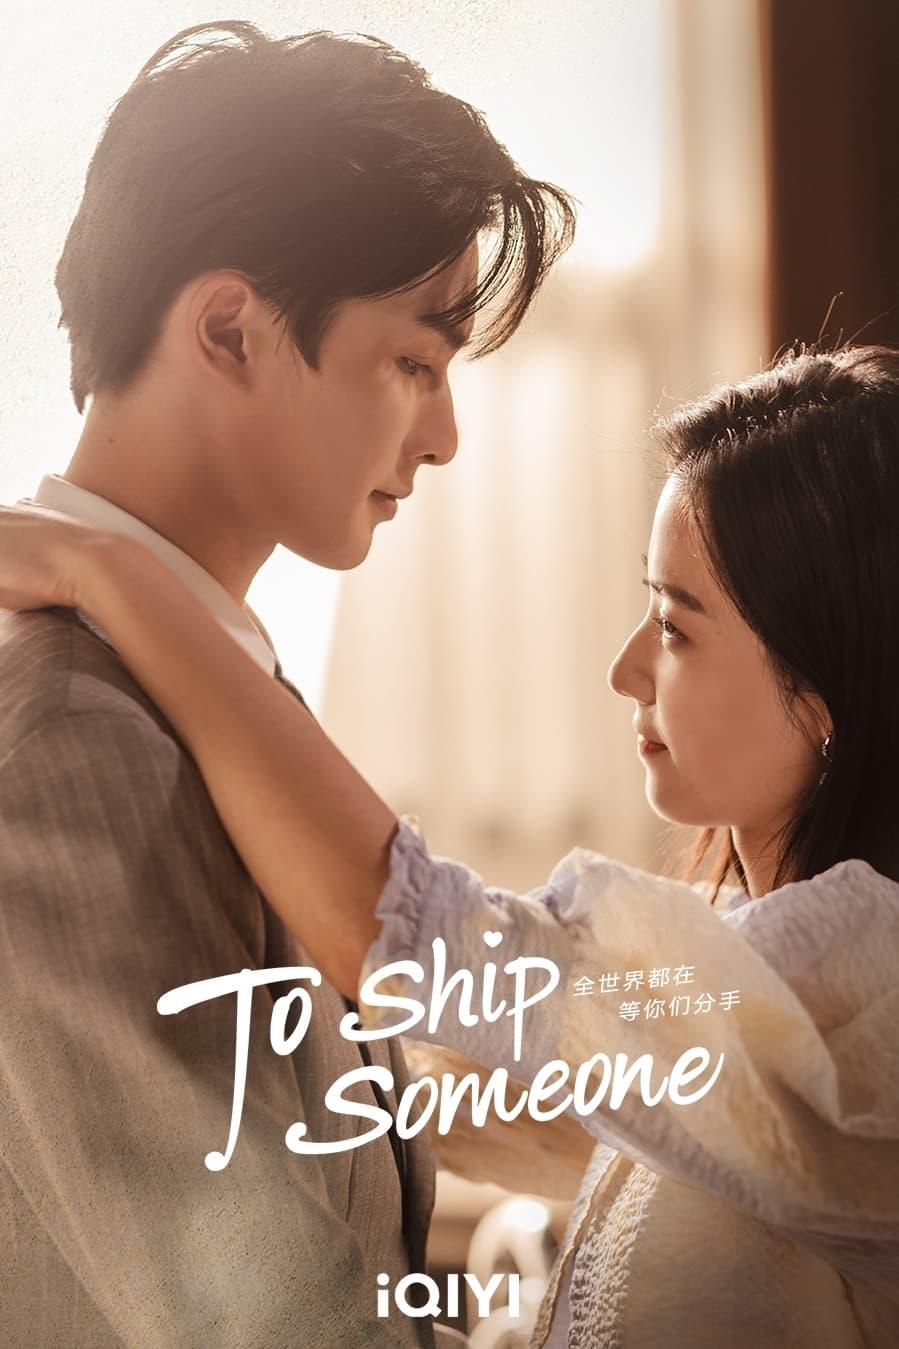 To Ship Someone poster